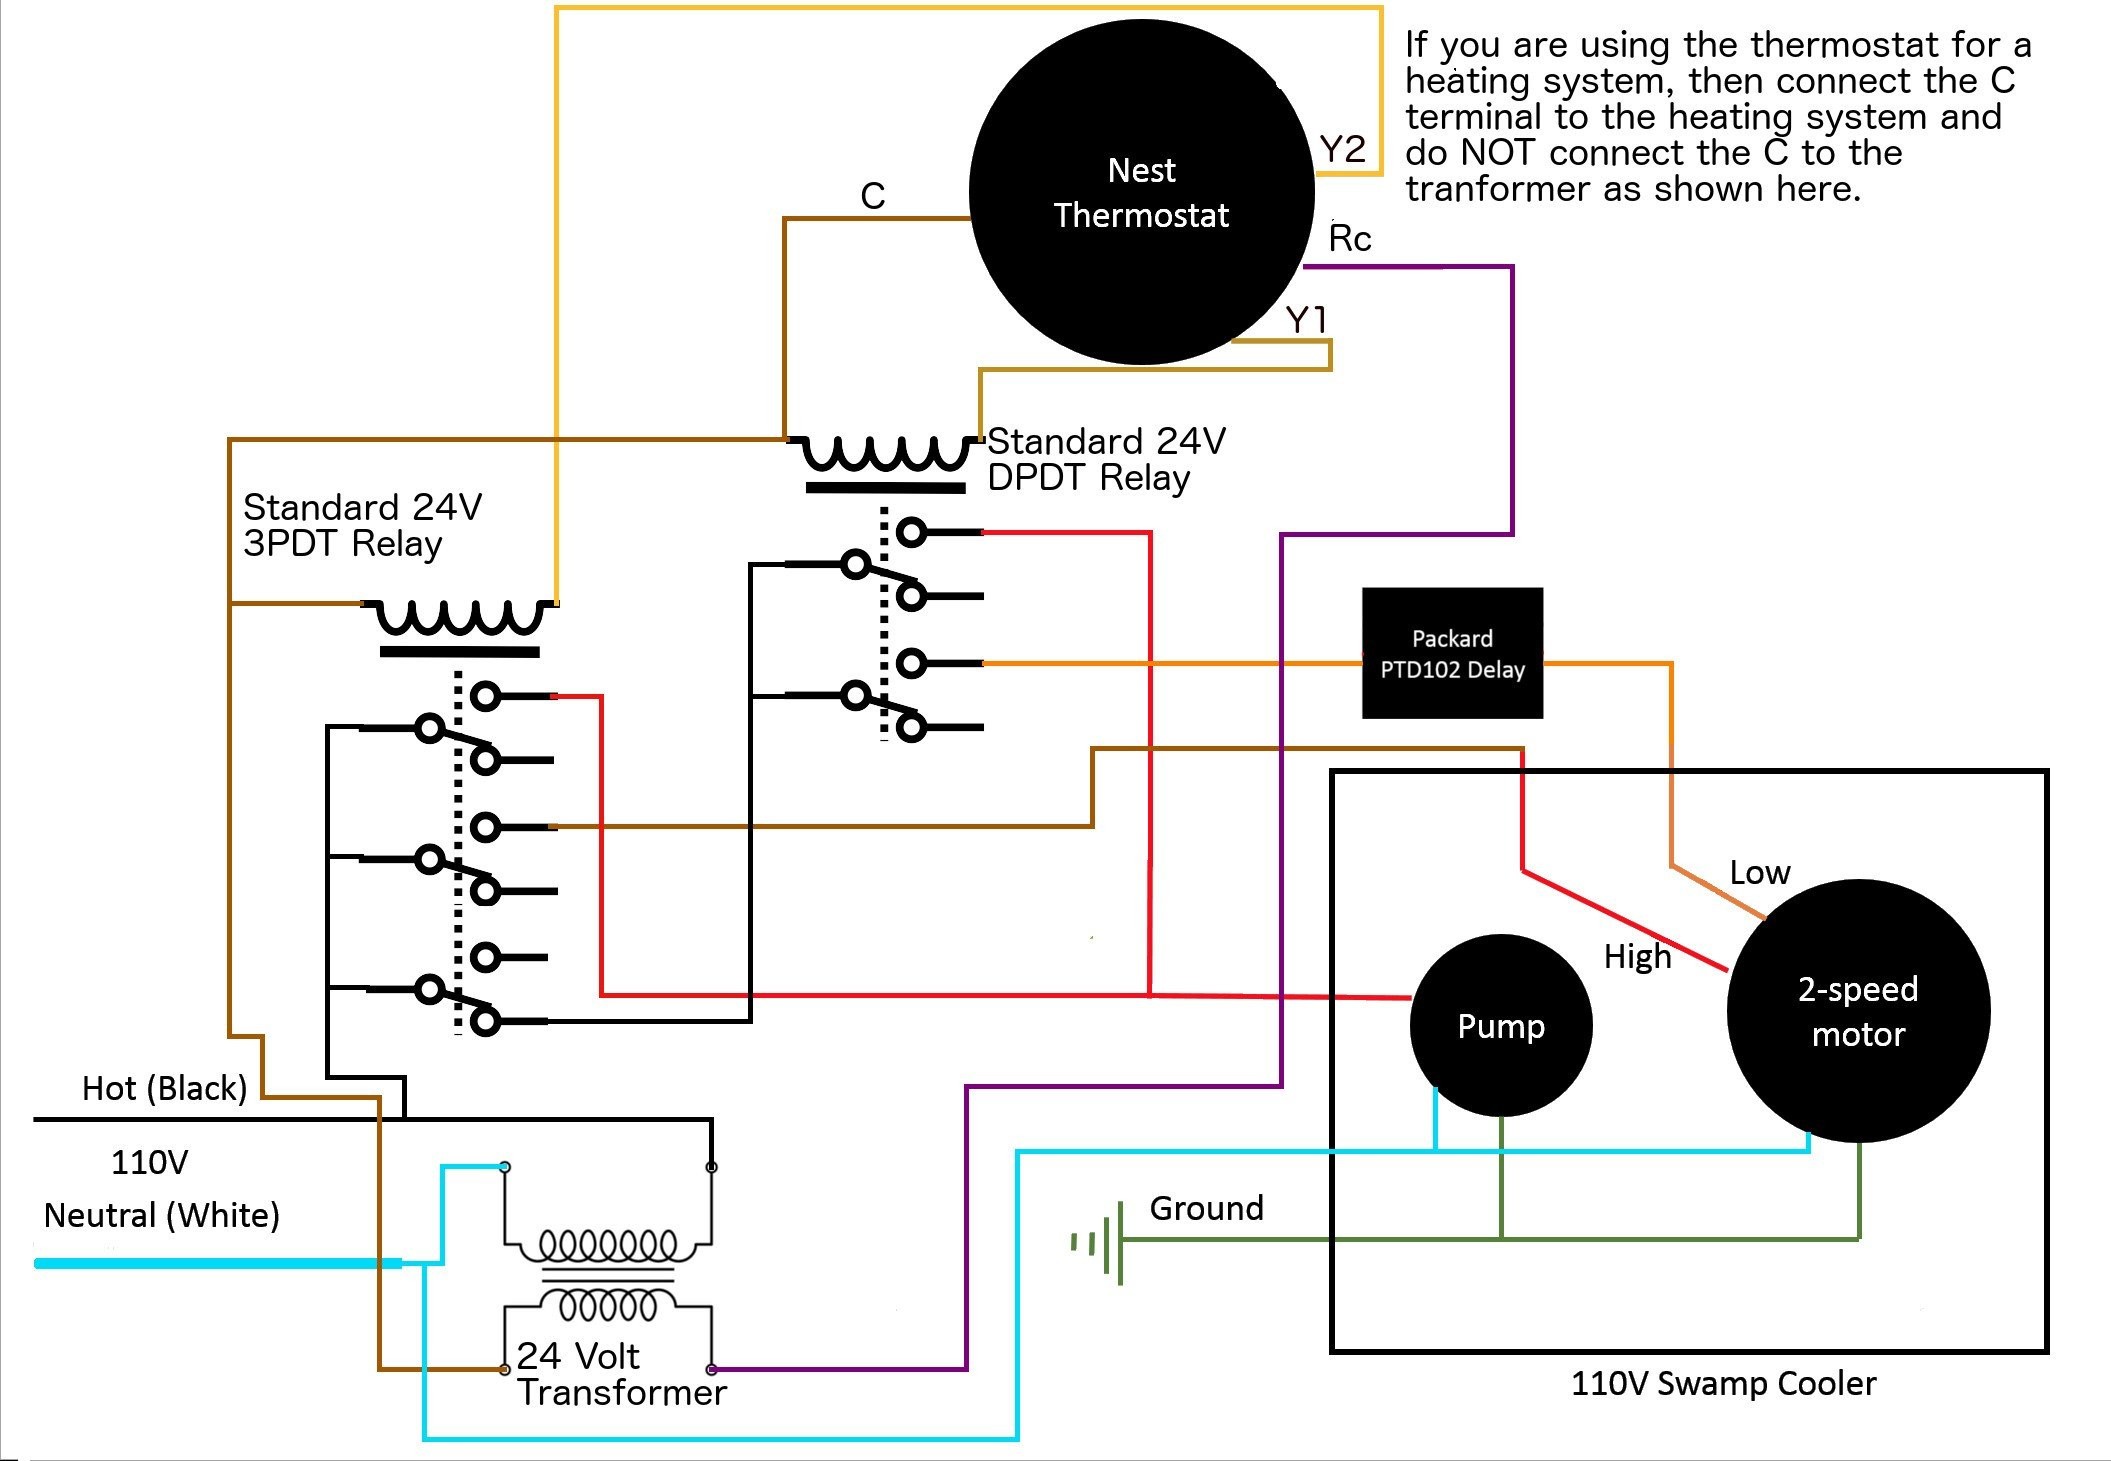 Evaporative Cooler Wiring Diagram Luxury Wiring Diagram Motor Control System Valid Wiring Controlling 110v New